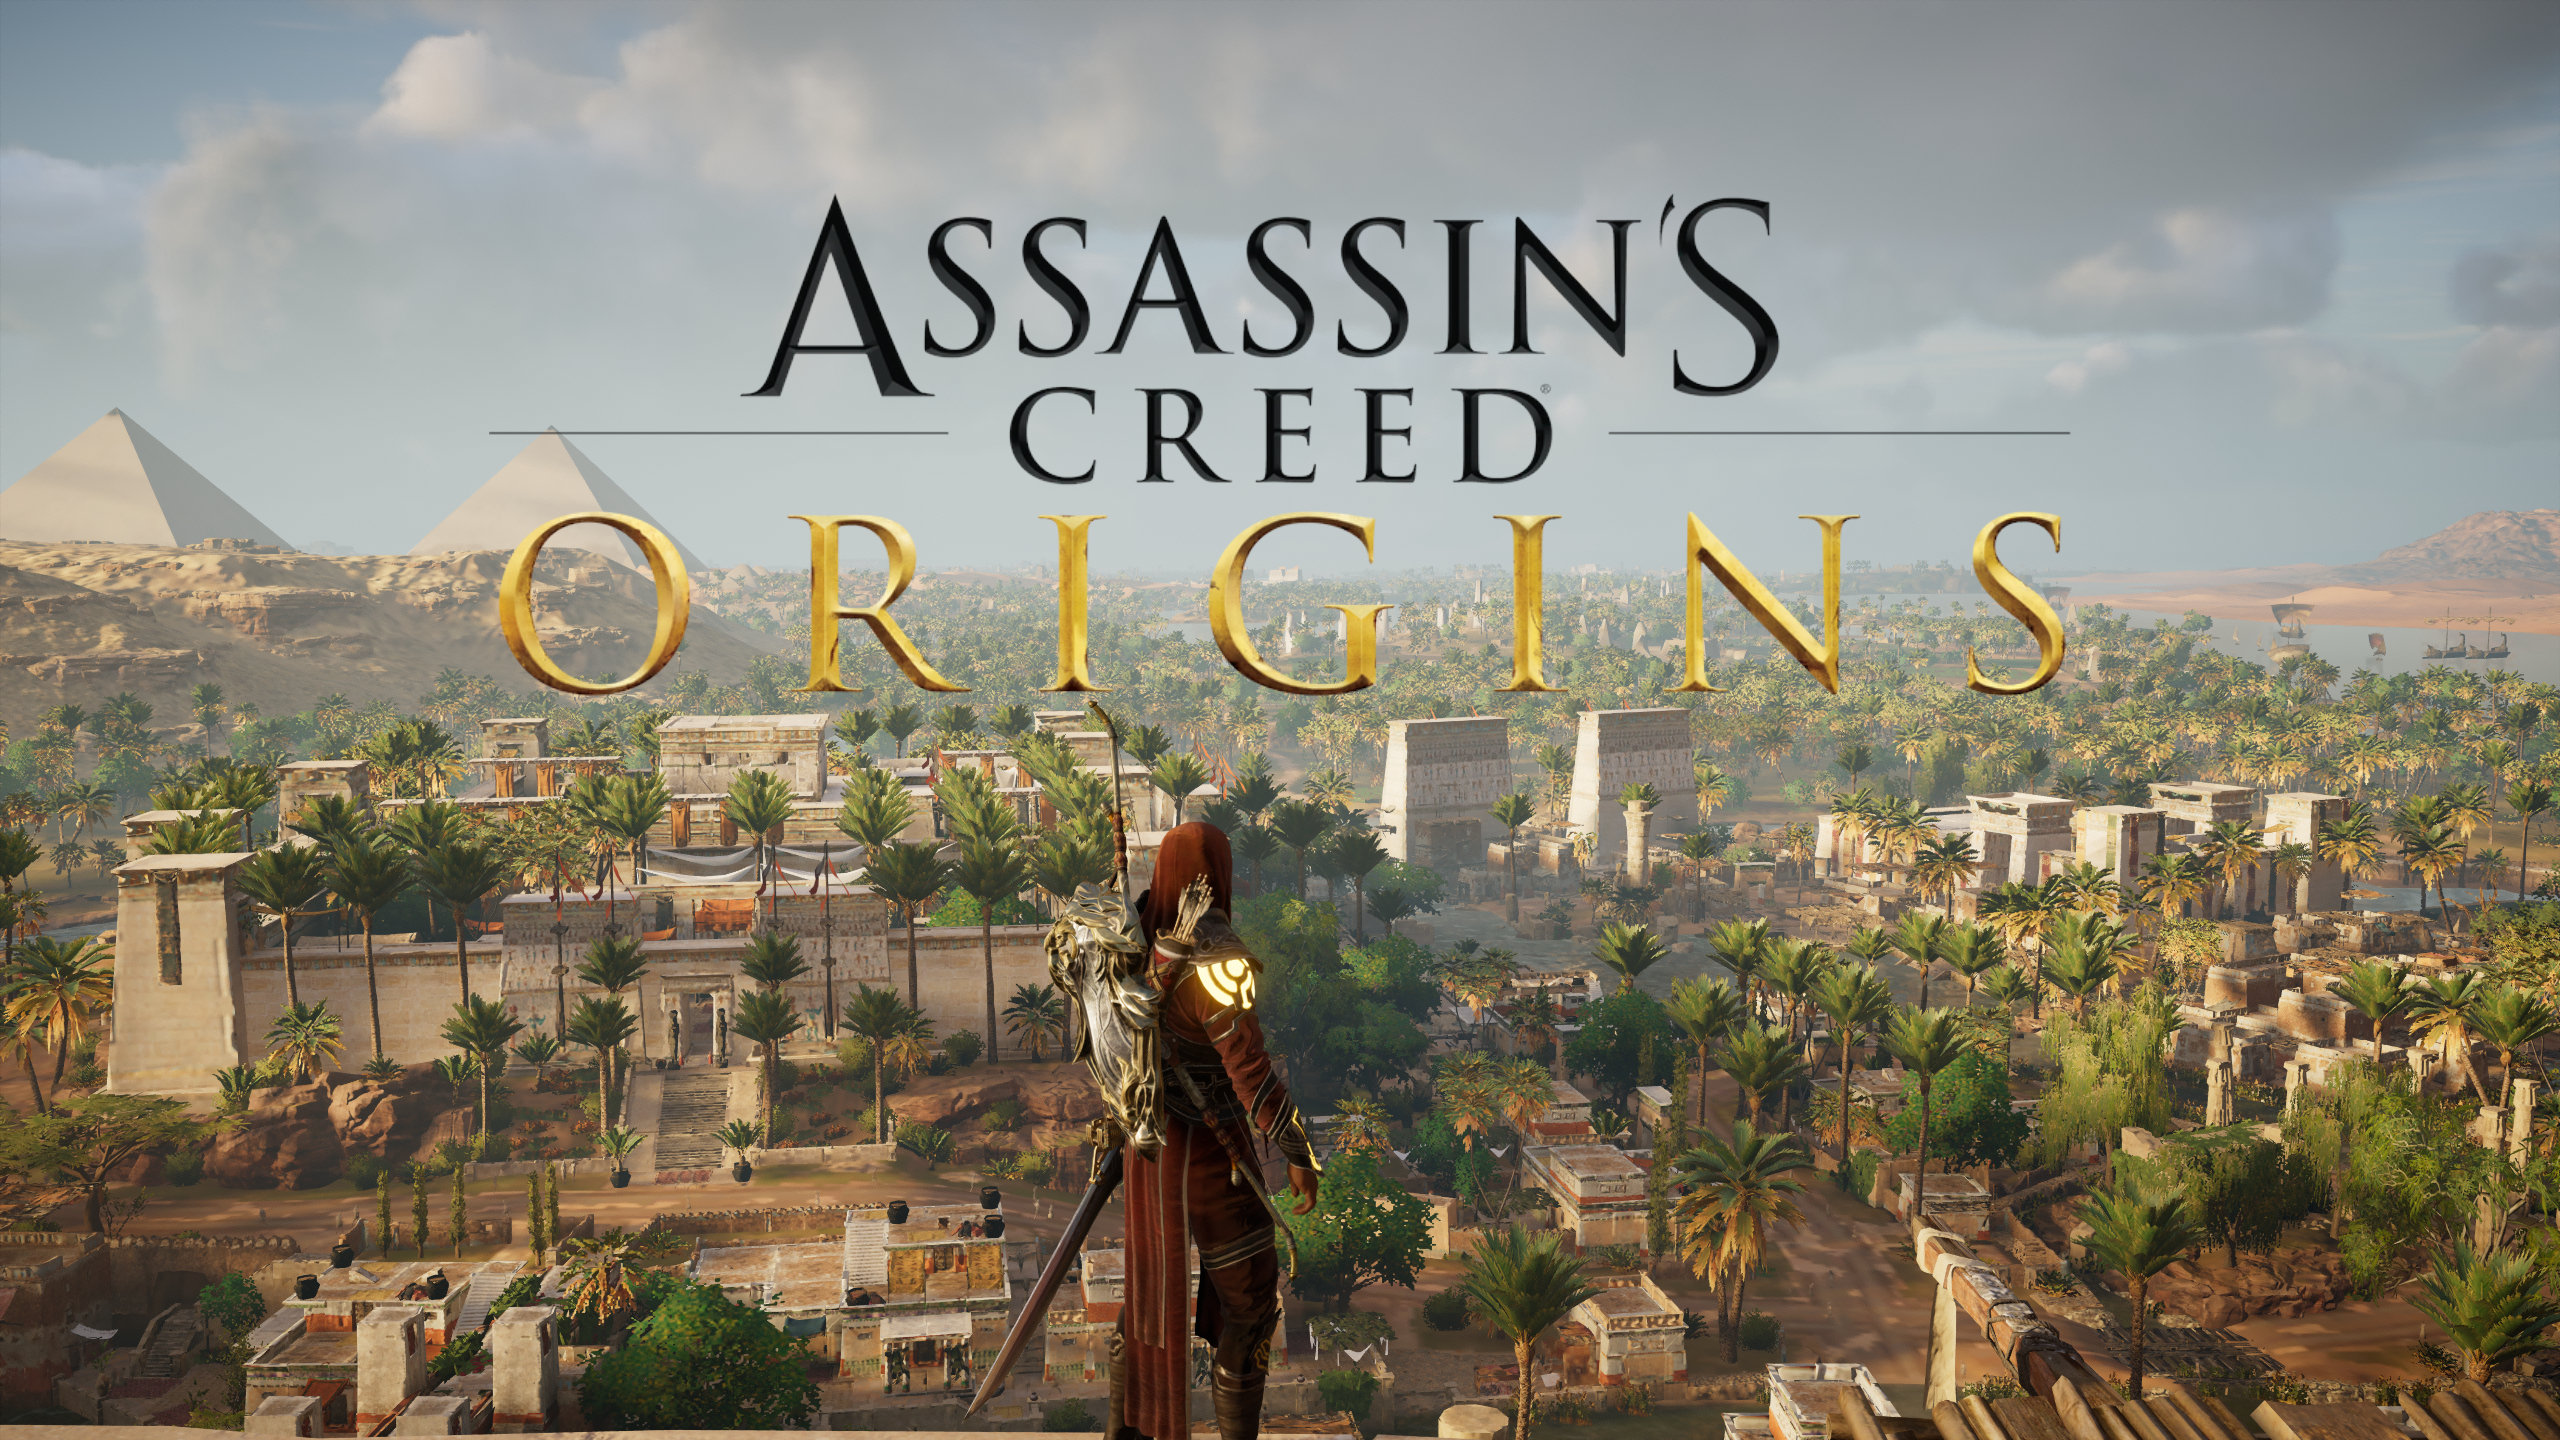 General 2560x1440 assassin creed origins title Assassin's Creed clouds video games standing sky pyramid hoods video game art landscape water CGI